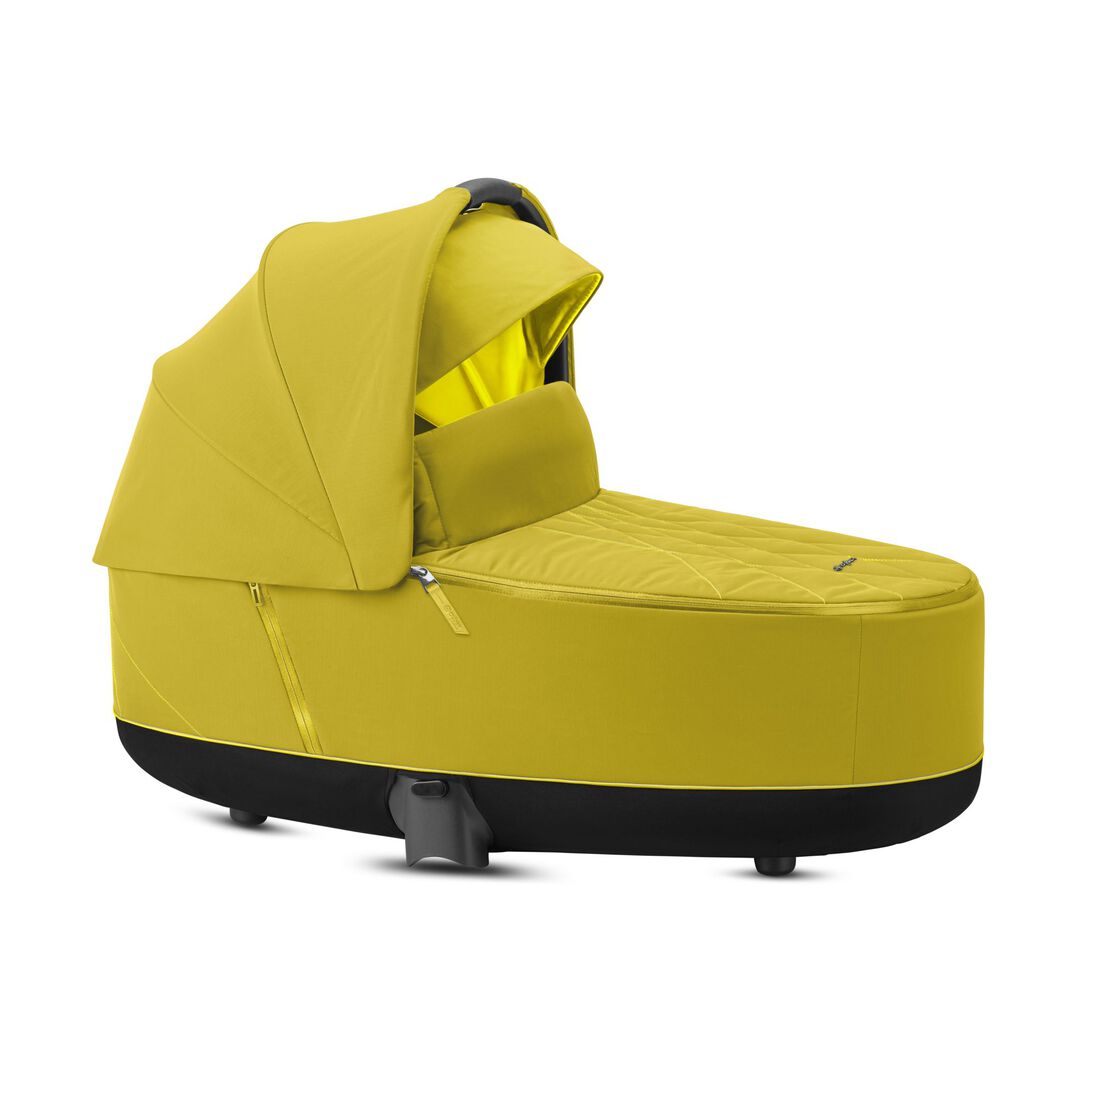 CYBEX Priam 3 Lux Carry Cot - Mustard Yellow in Mustard Yellow large image number 2